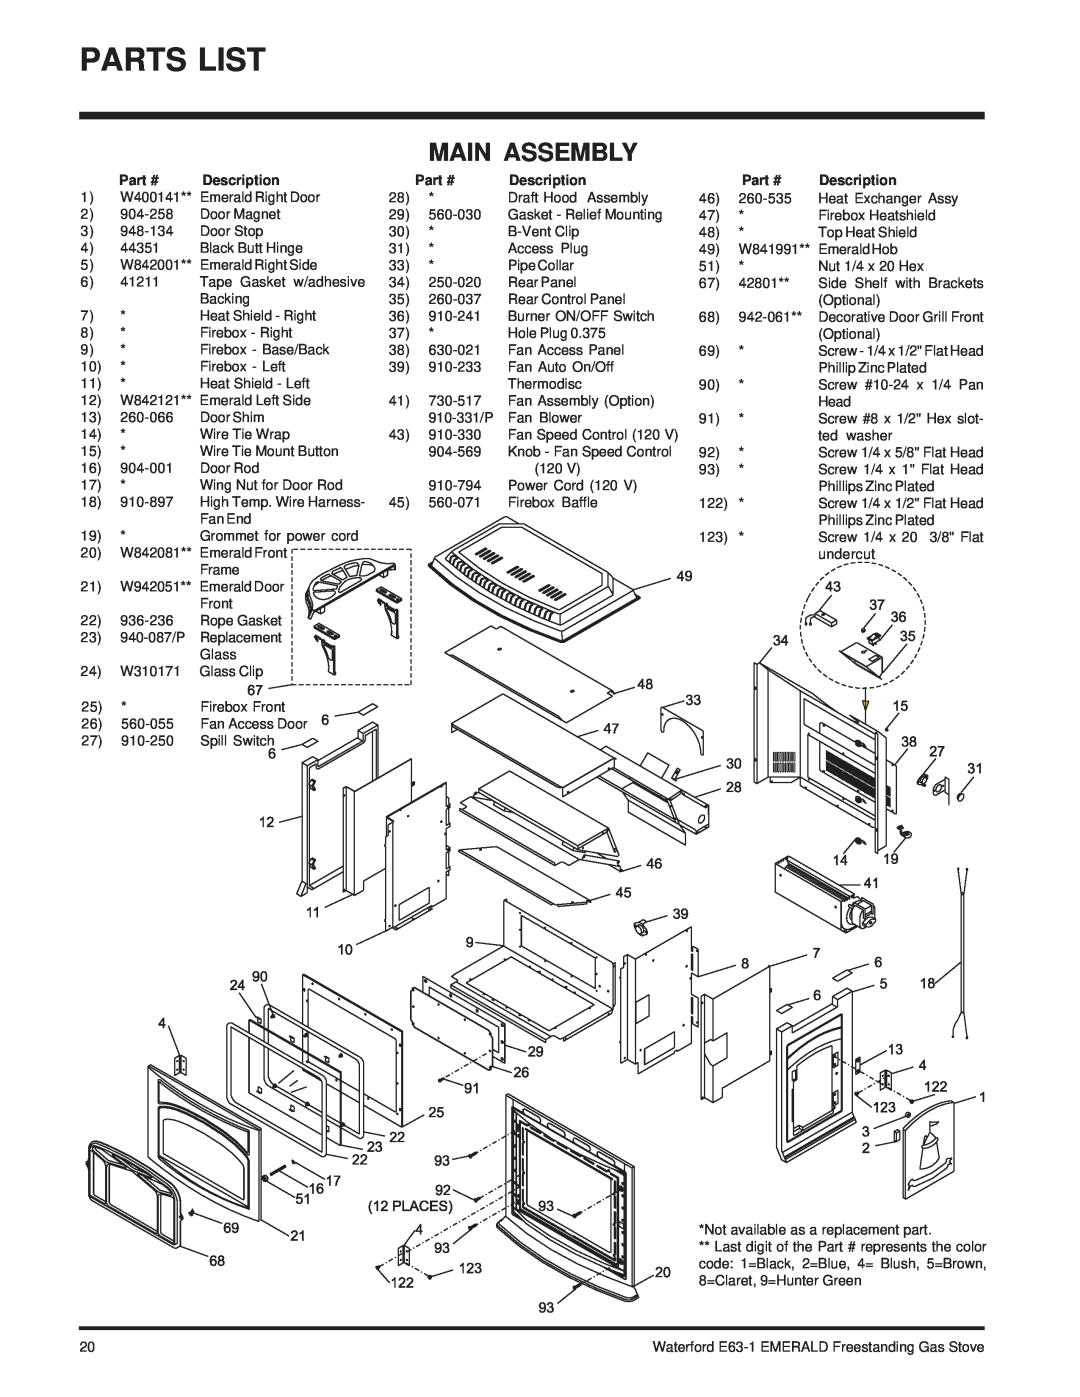 Waterford Appliances E63-NG1 installation manual Main Assembly, Description 